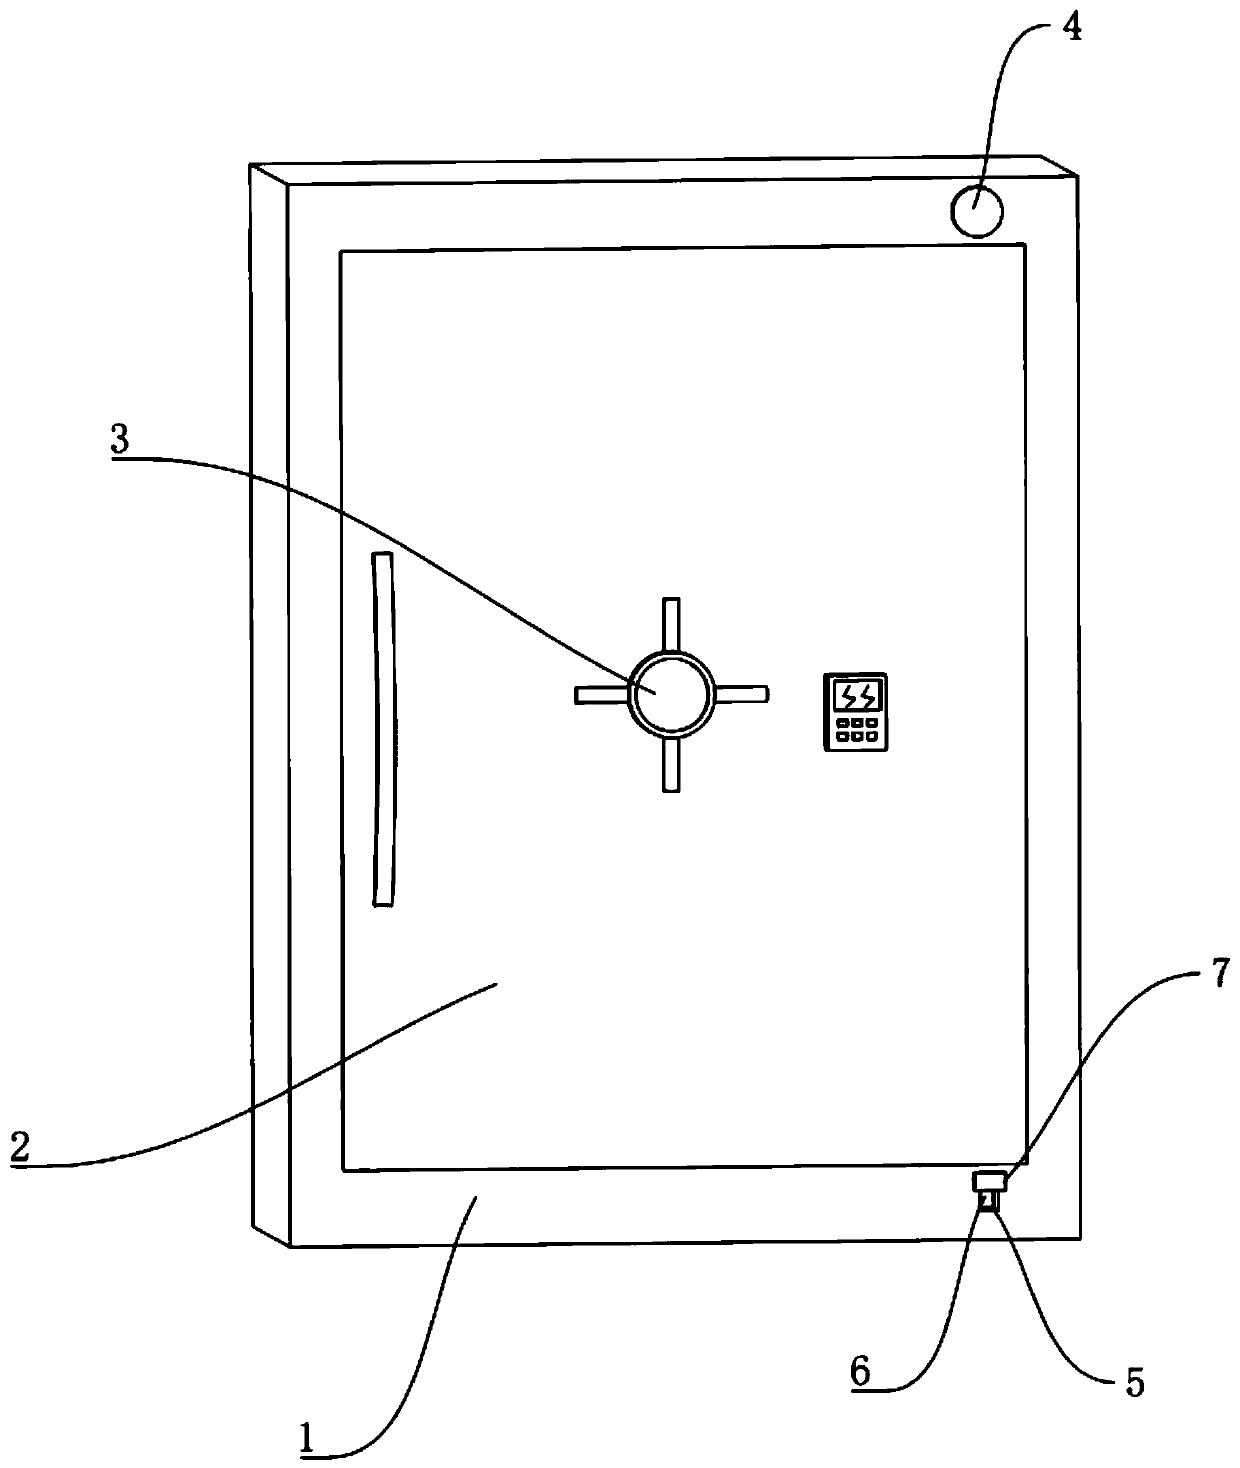 Anti-theft safety device and method for bank vault